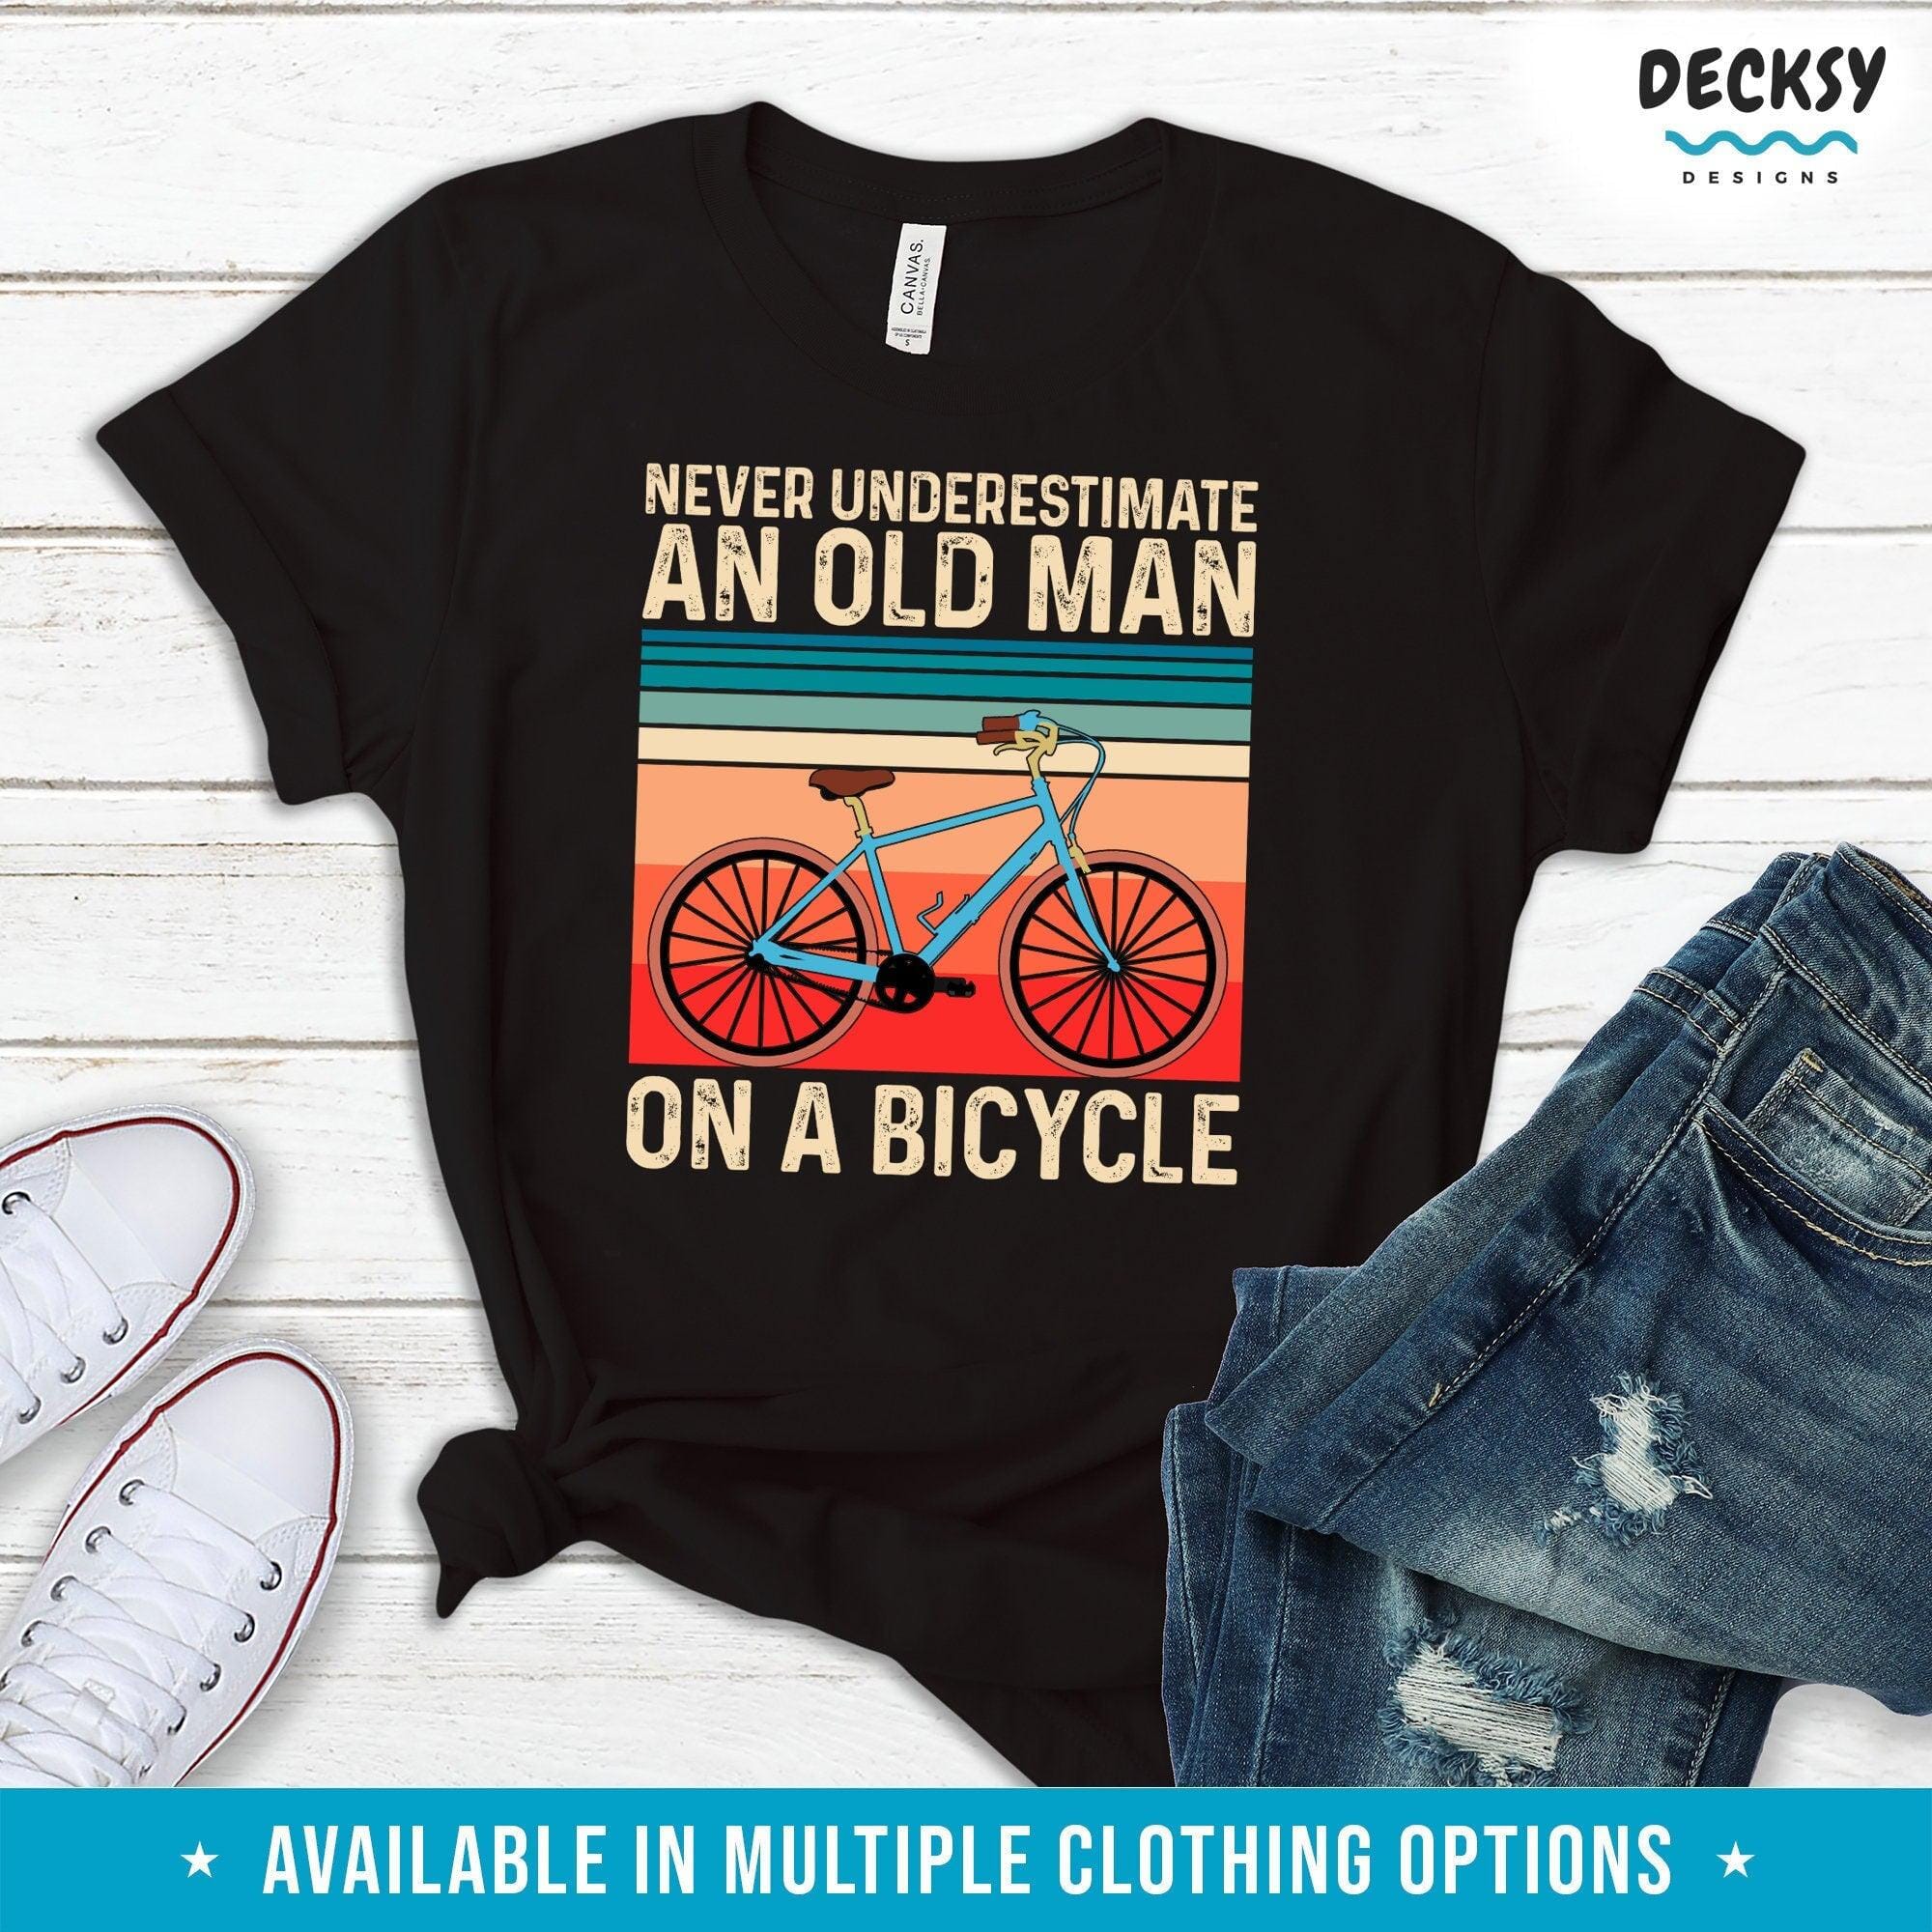 Cyclist Shirt, Cycling Dad Gift-Clothing:Gender-Neutral Adult Clothing:Tops & Tees:T-shirts:Graphic Tees-DecksyDesigns